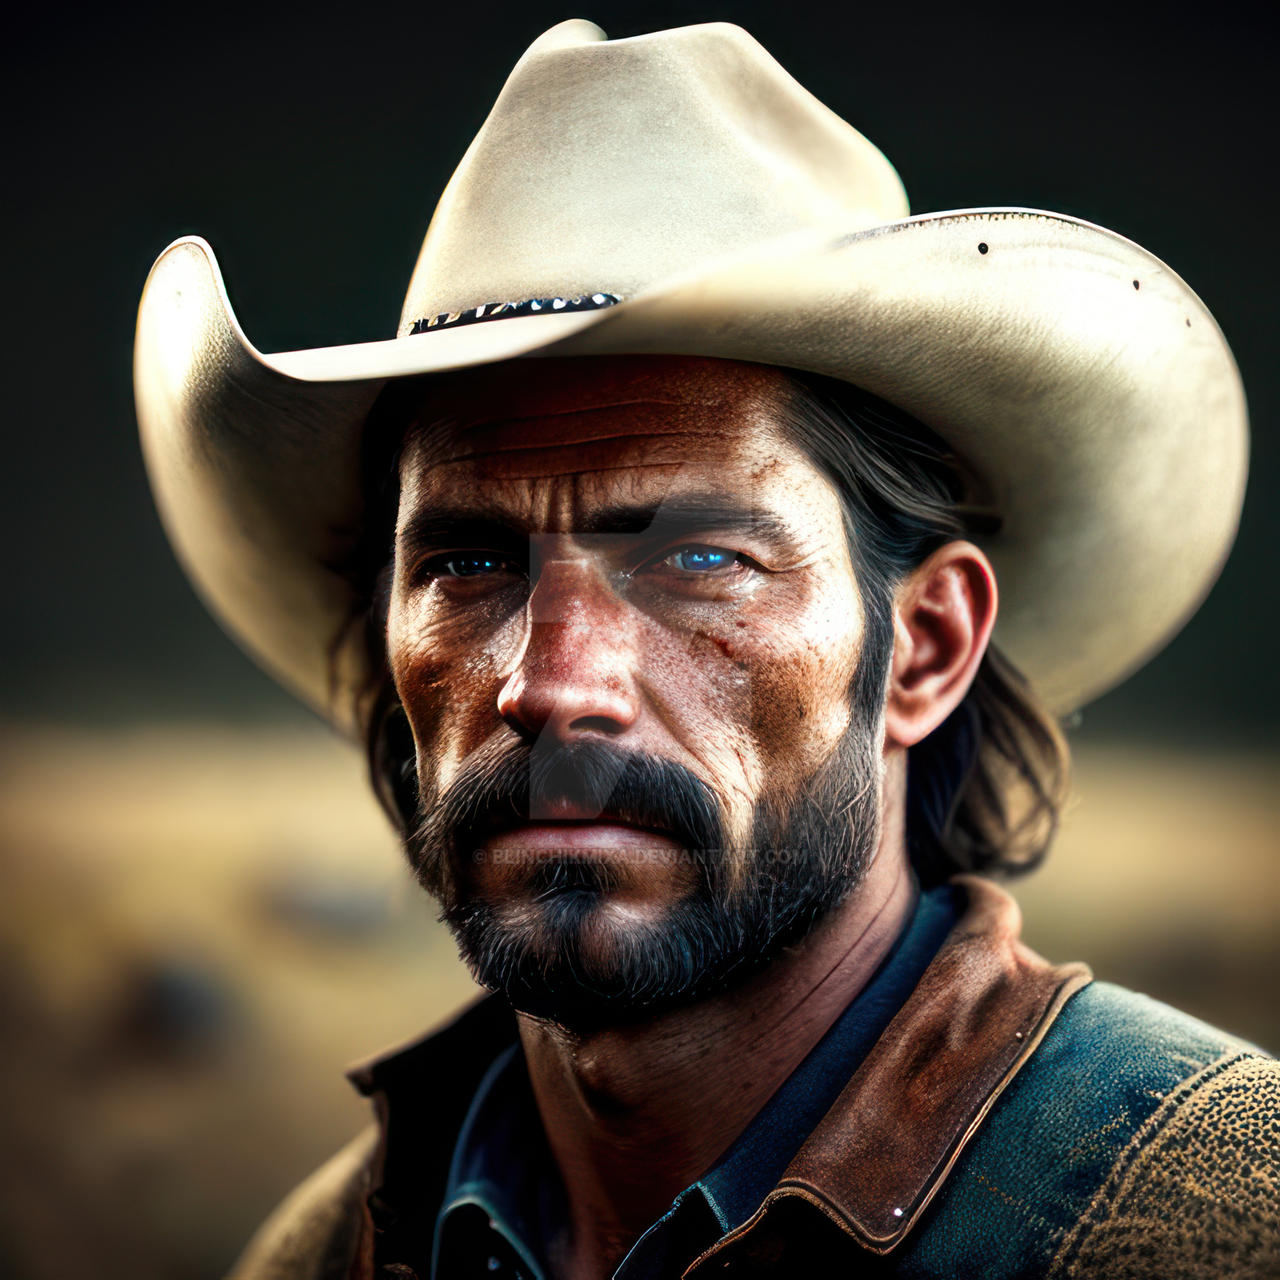 arthur morgan from the game red dead redemption 2, Stable Diffusion